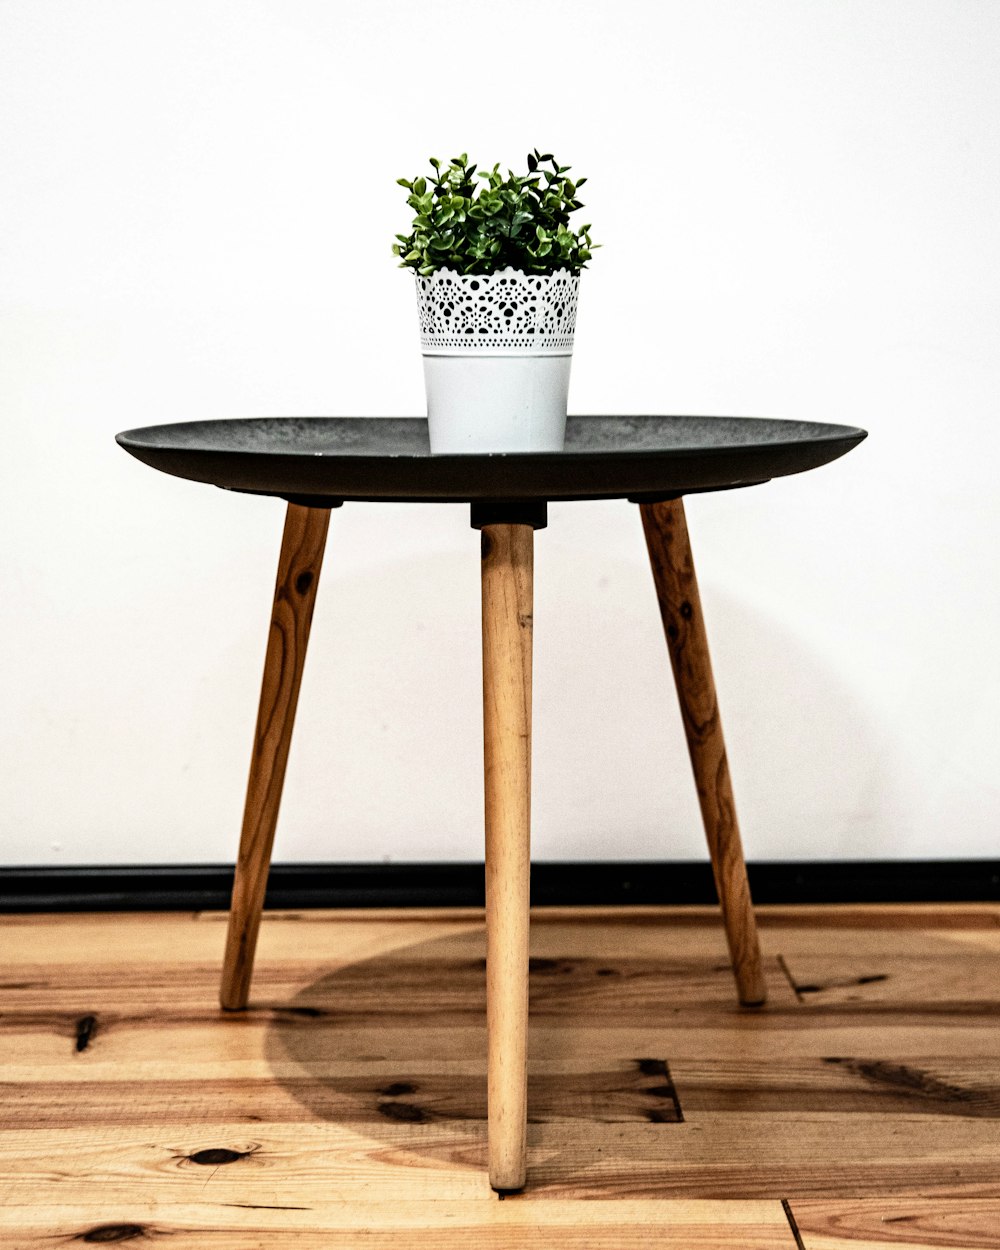 green plant on brown wooden seat